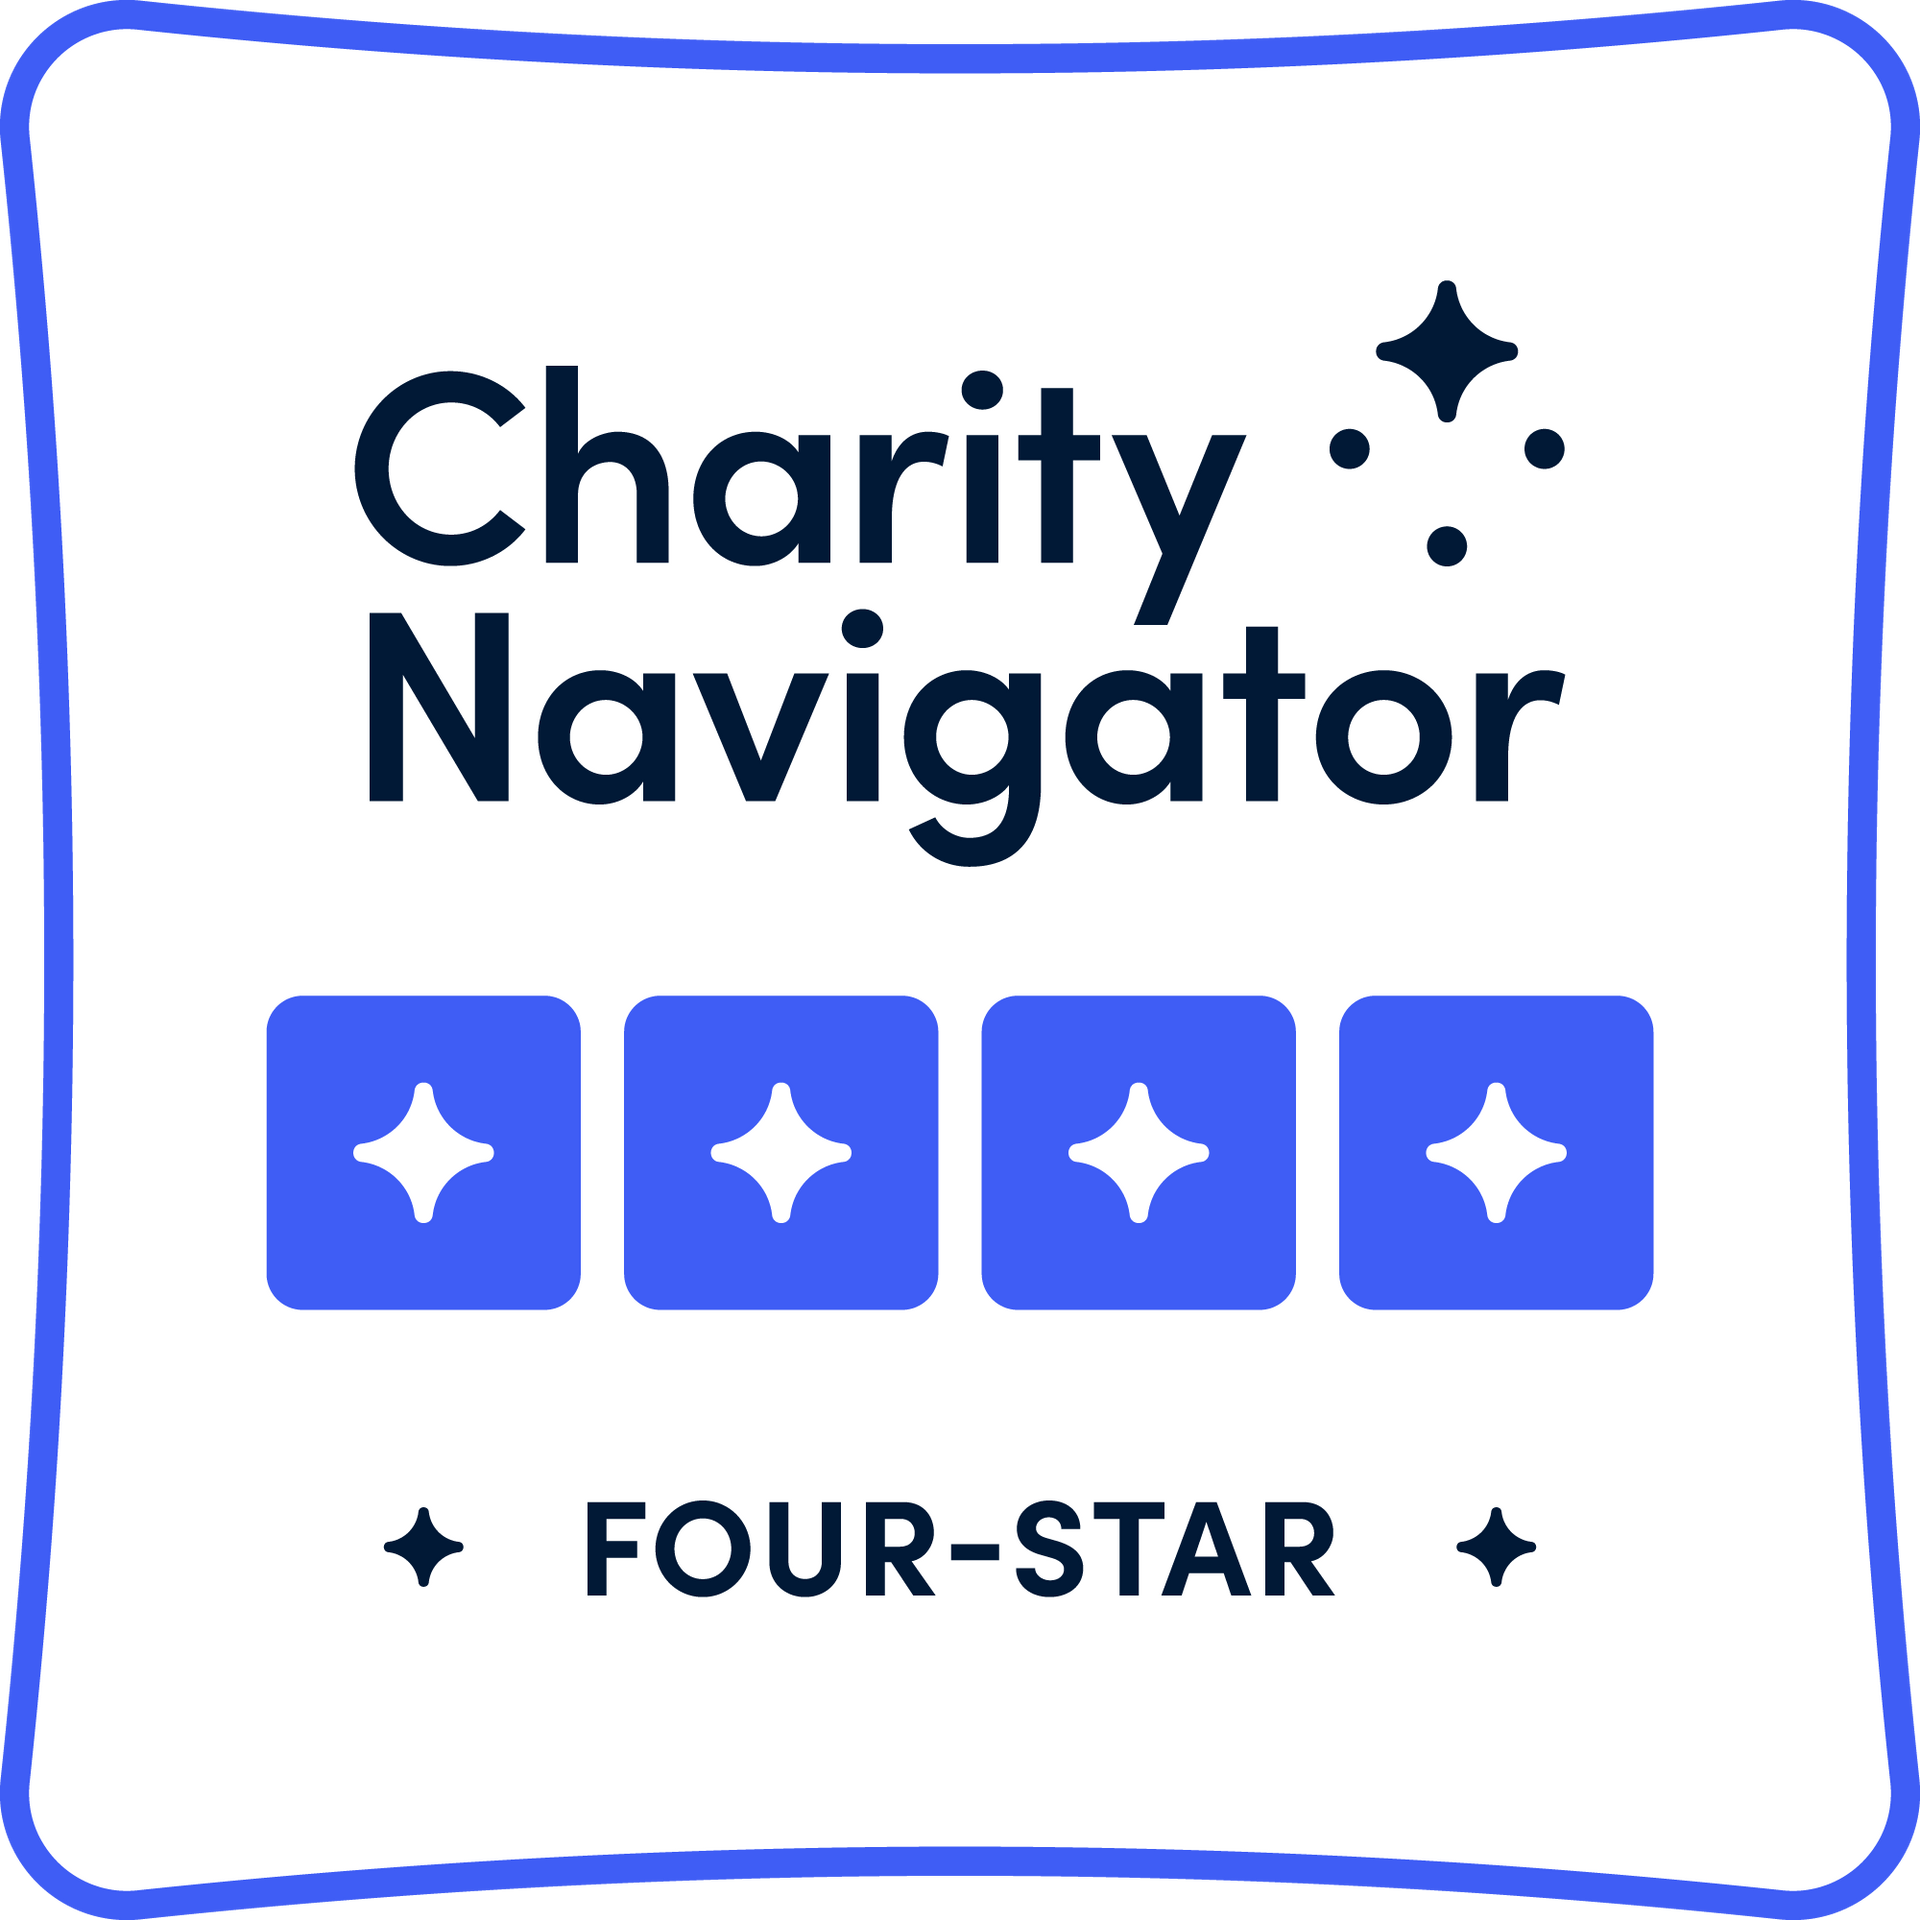 The logo for charity navigator is a four-star badge.